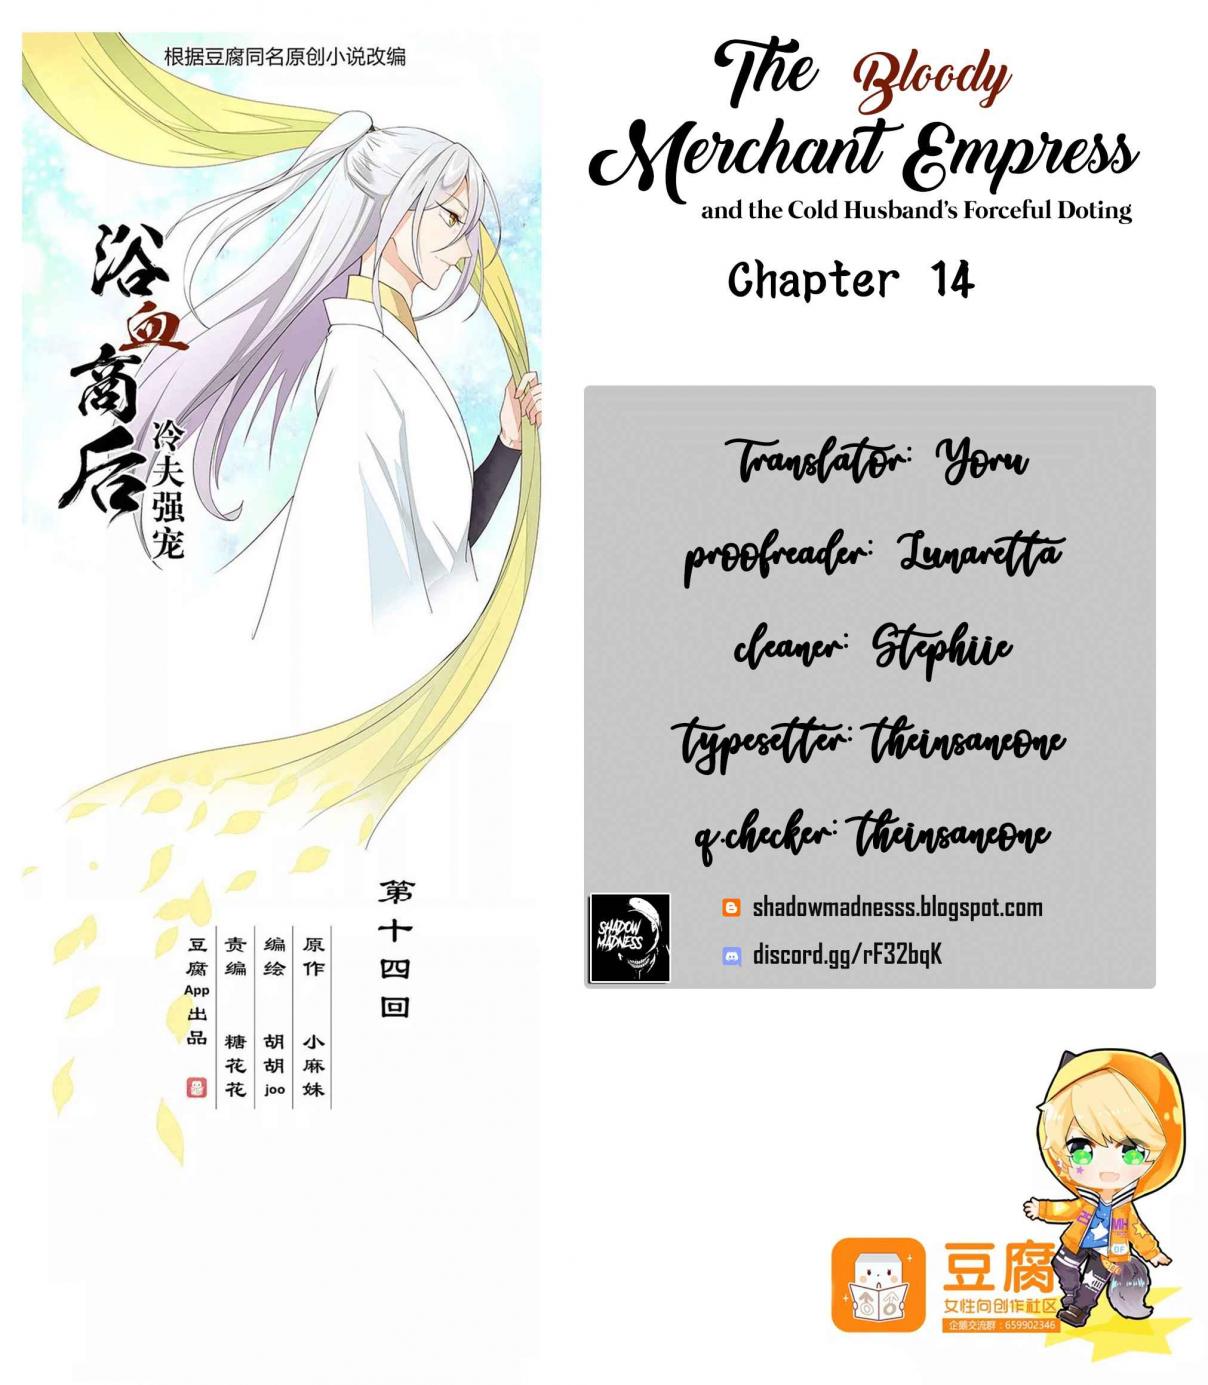 The Bloody Merchant Empress and the Cold Husband's Forceful Doting Ch. 14